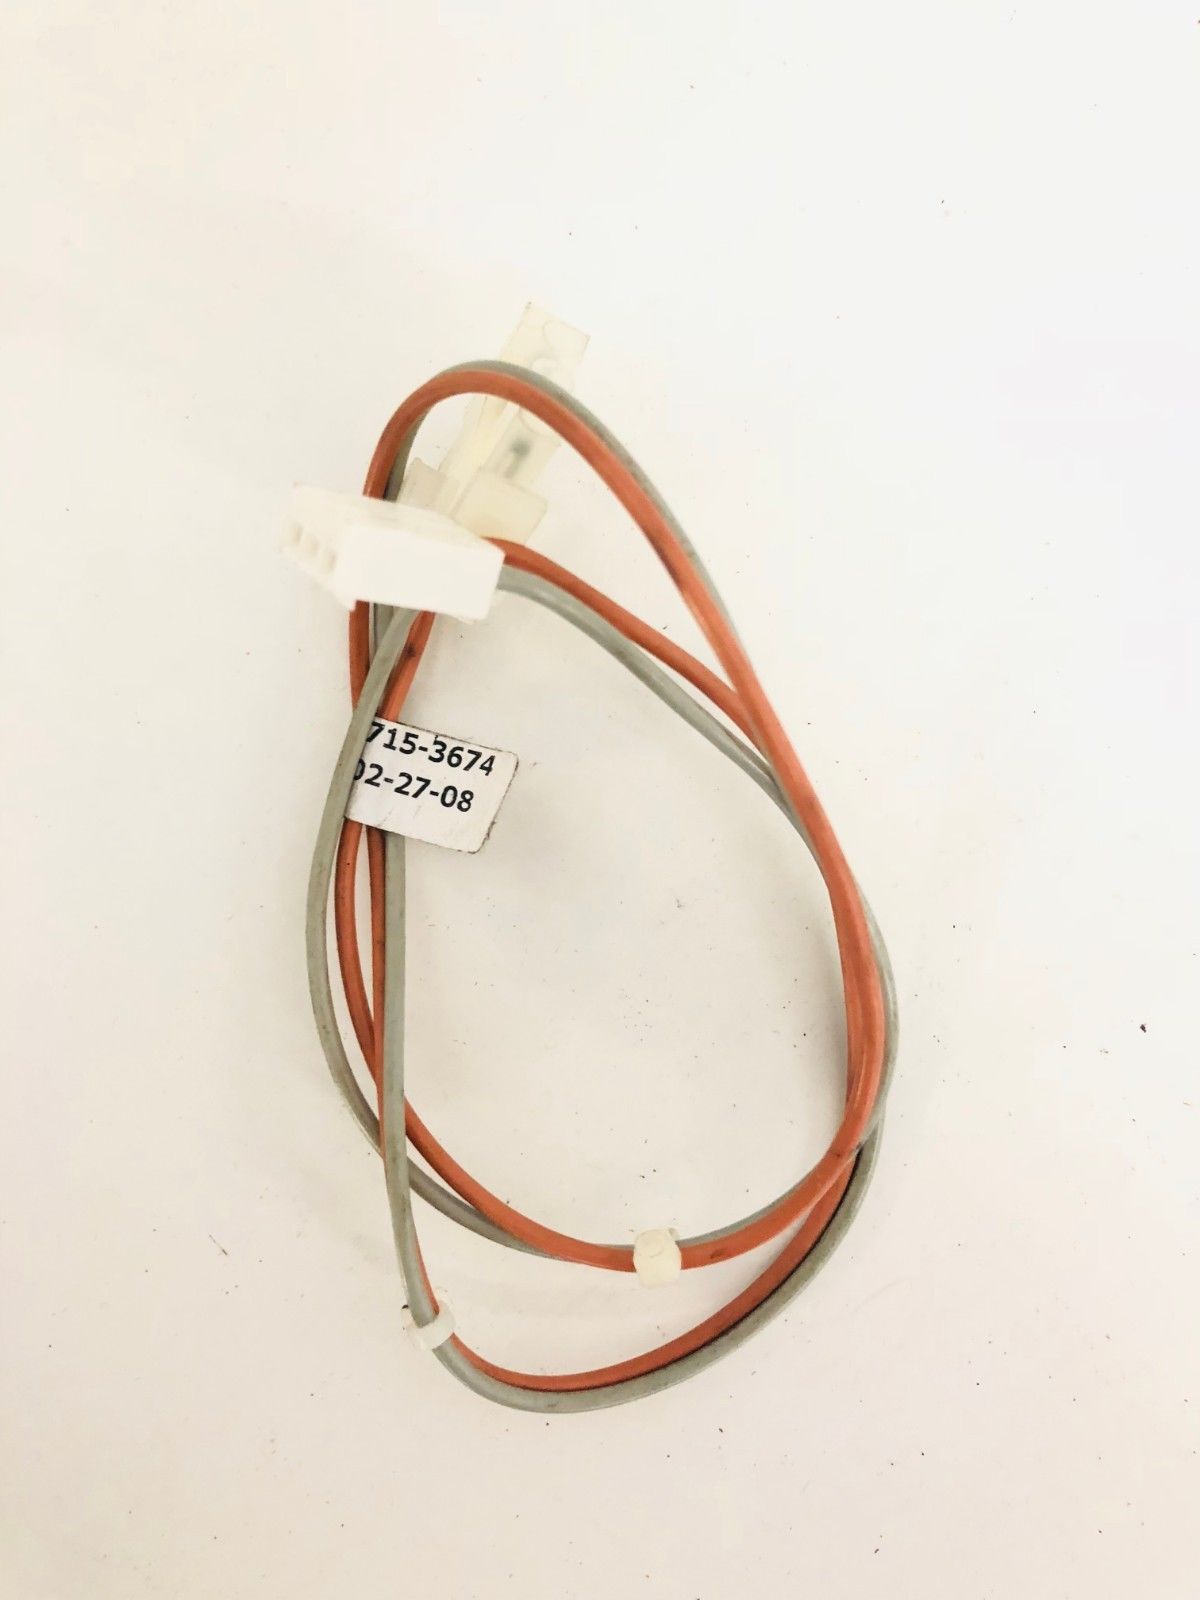 Power Supply Wire Harness (Used)